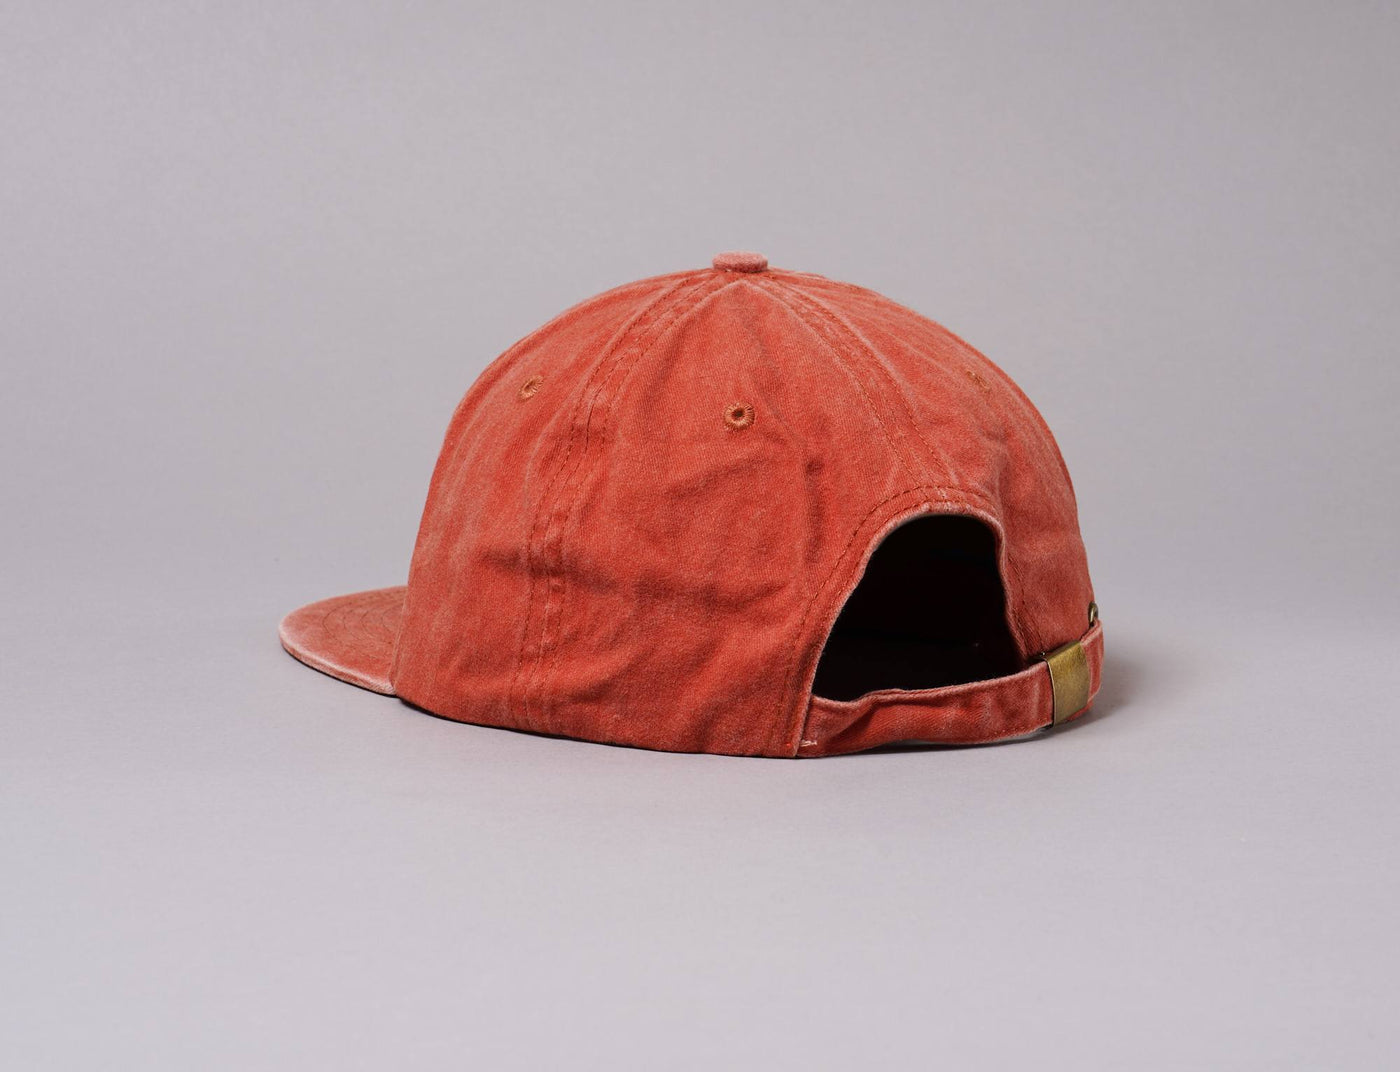 Cap Adjustable Free & Easy Don't Trip Washed Snapback Cap Terracotta Free & Easy Bucket Hat / Red / One Size